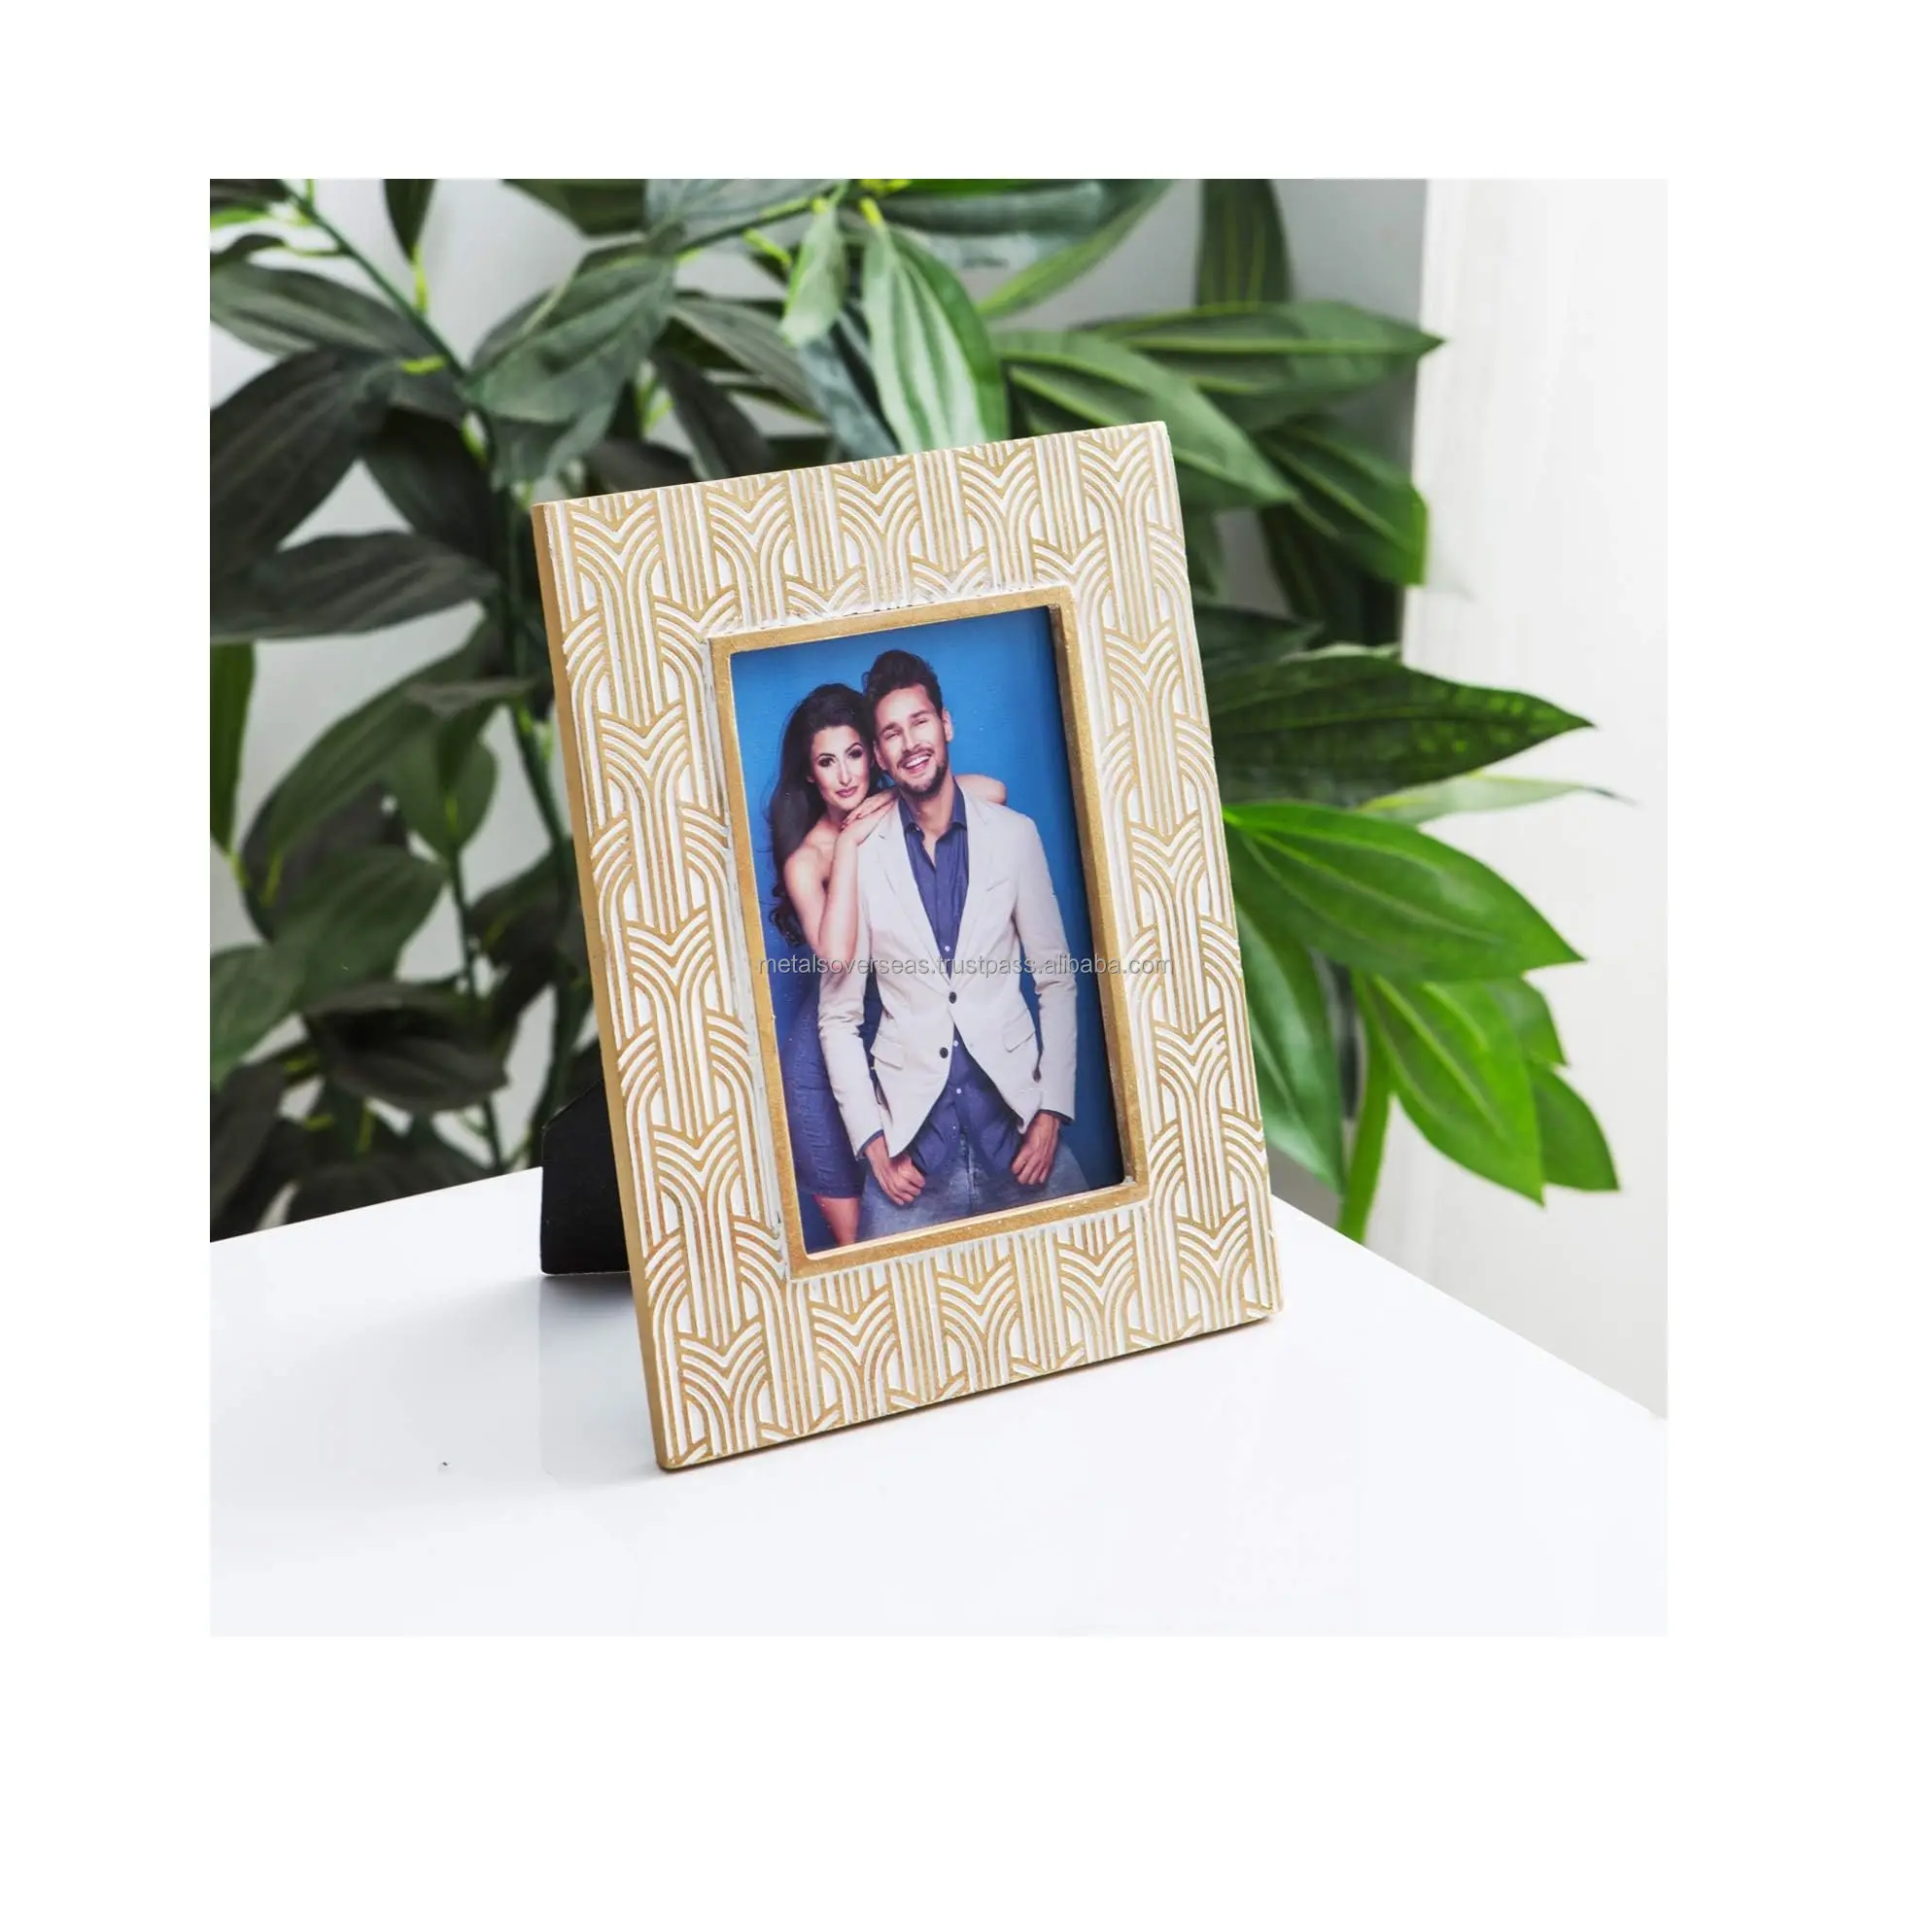 4x6 Picture Frames Resin Table Rustic Photo Frame with High Definition Glass for Wall or Tabletop Display